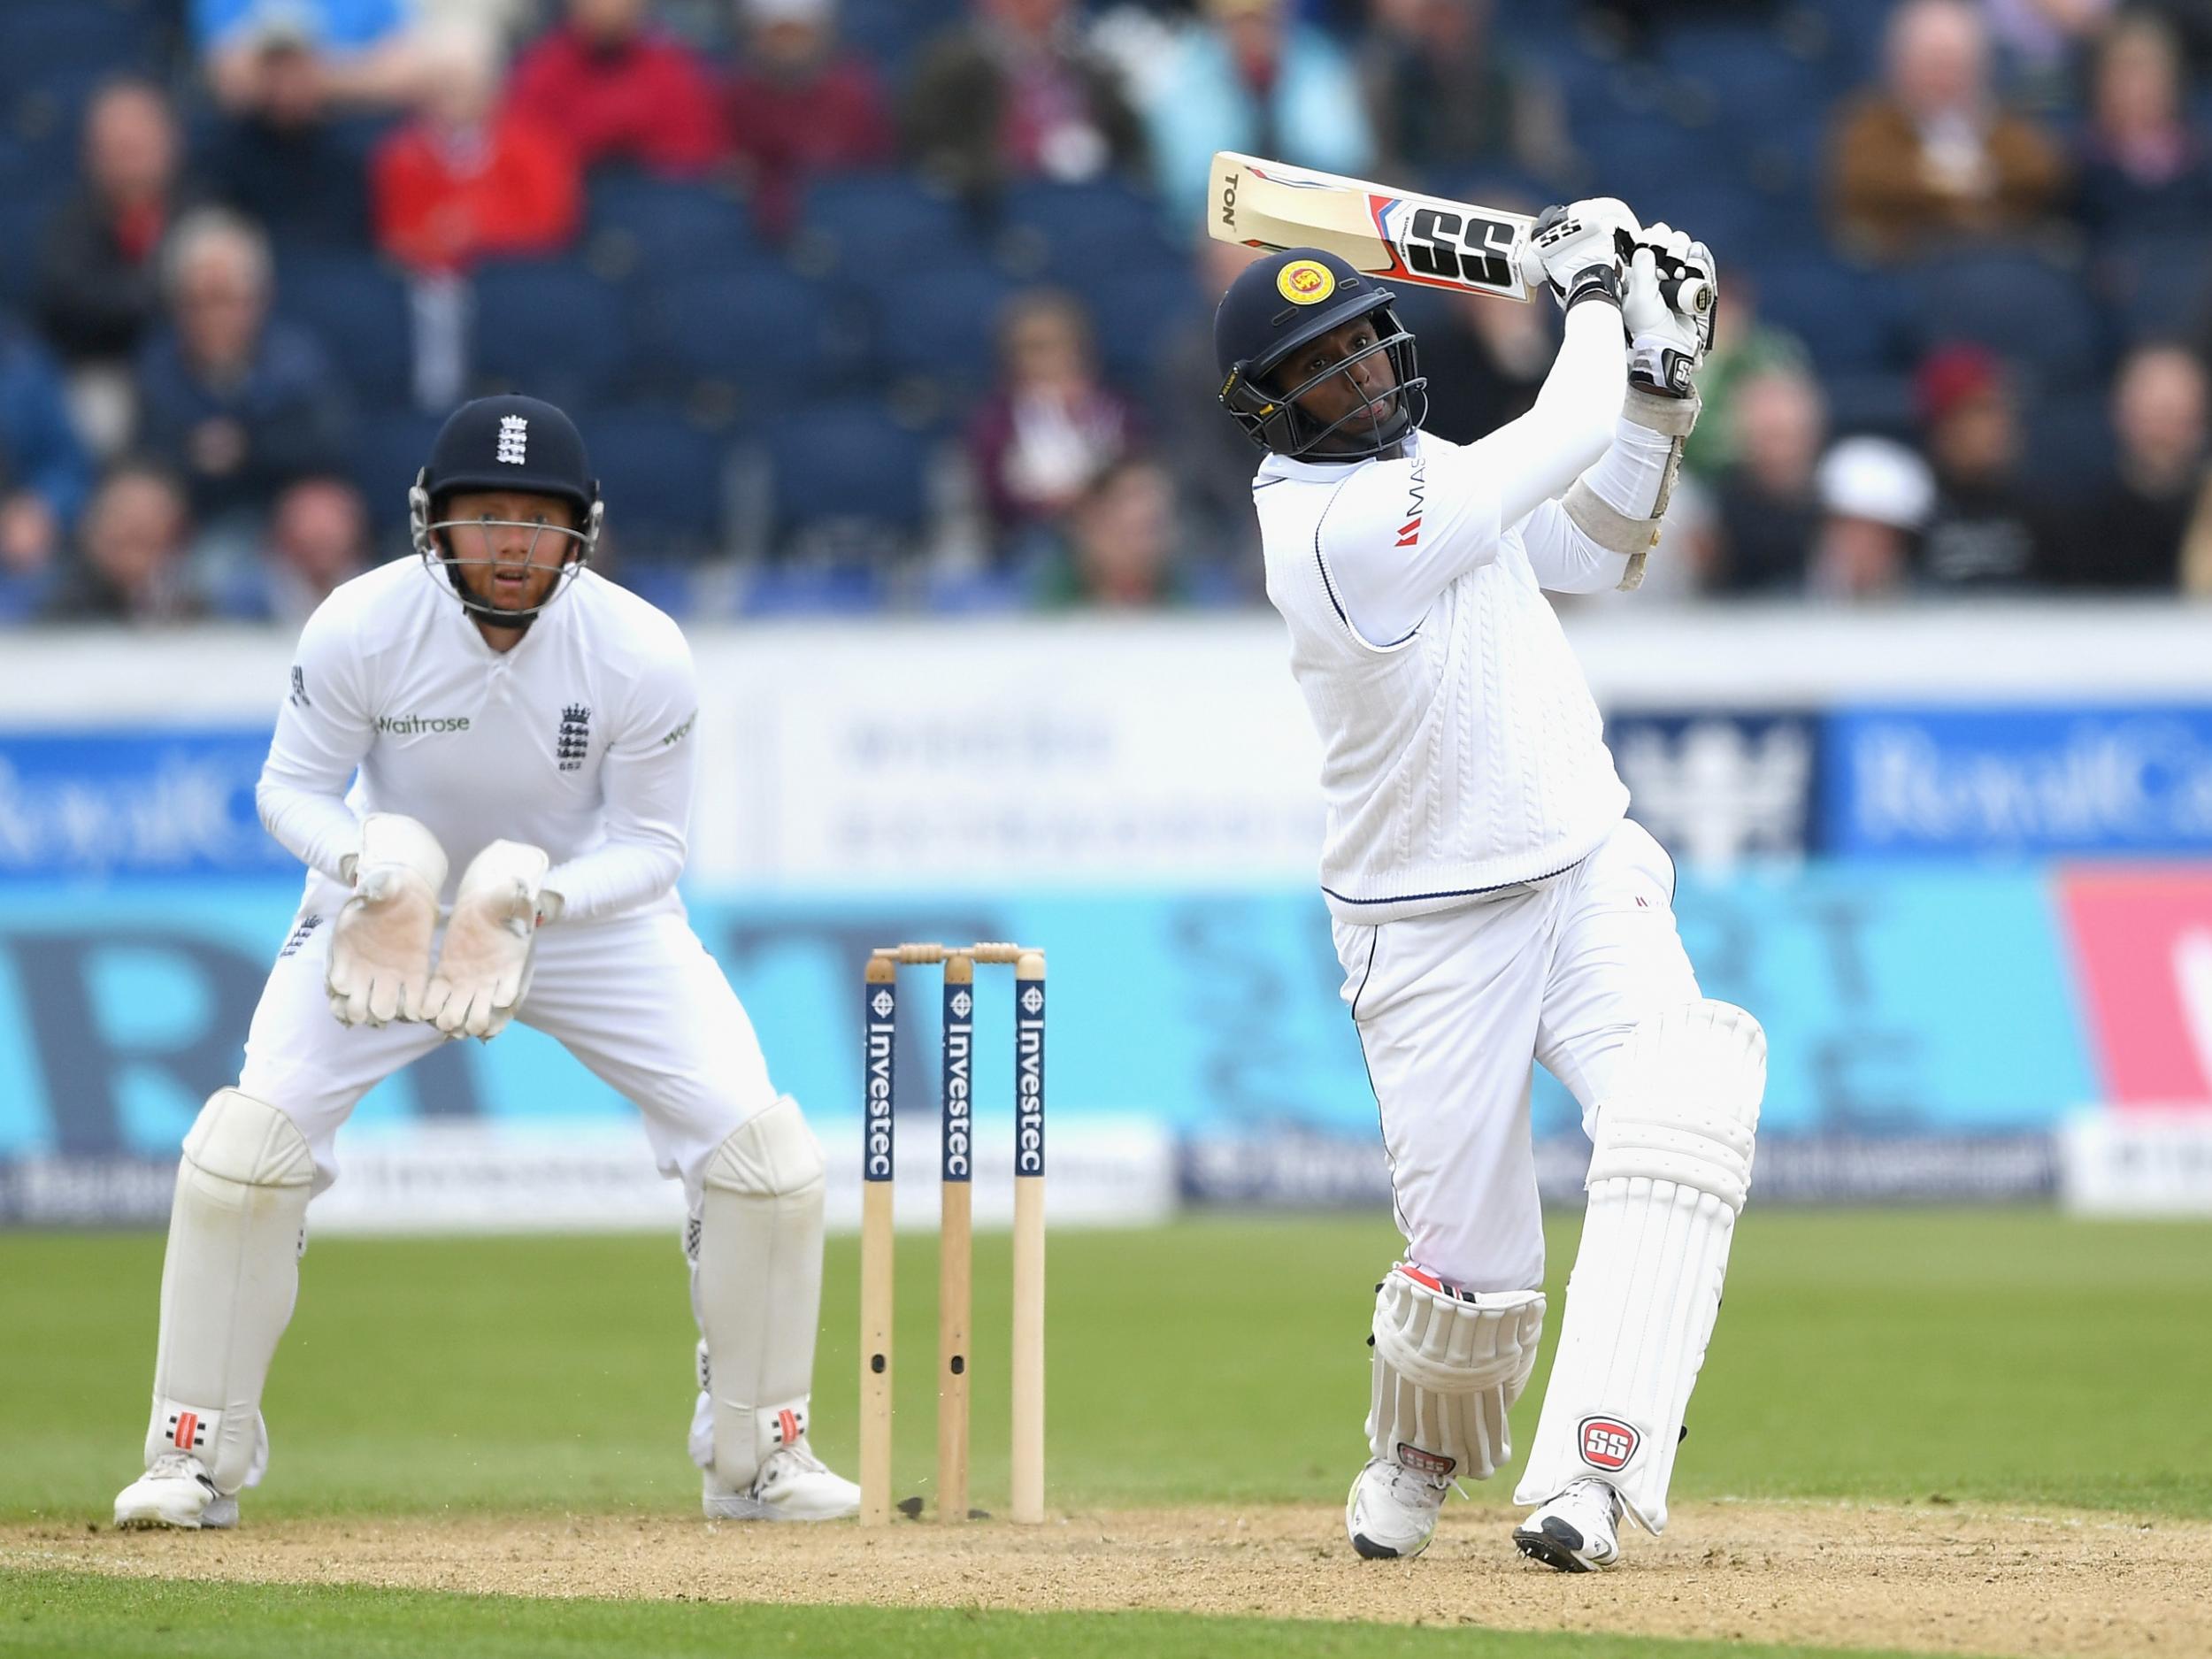 A true captain’s innings of 80 from Angelo Mathews kept the guests in it